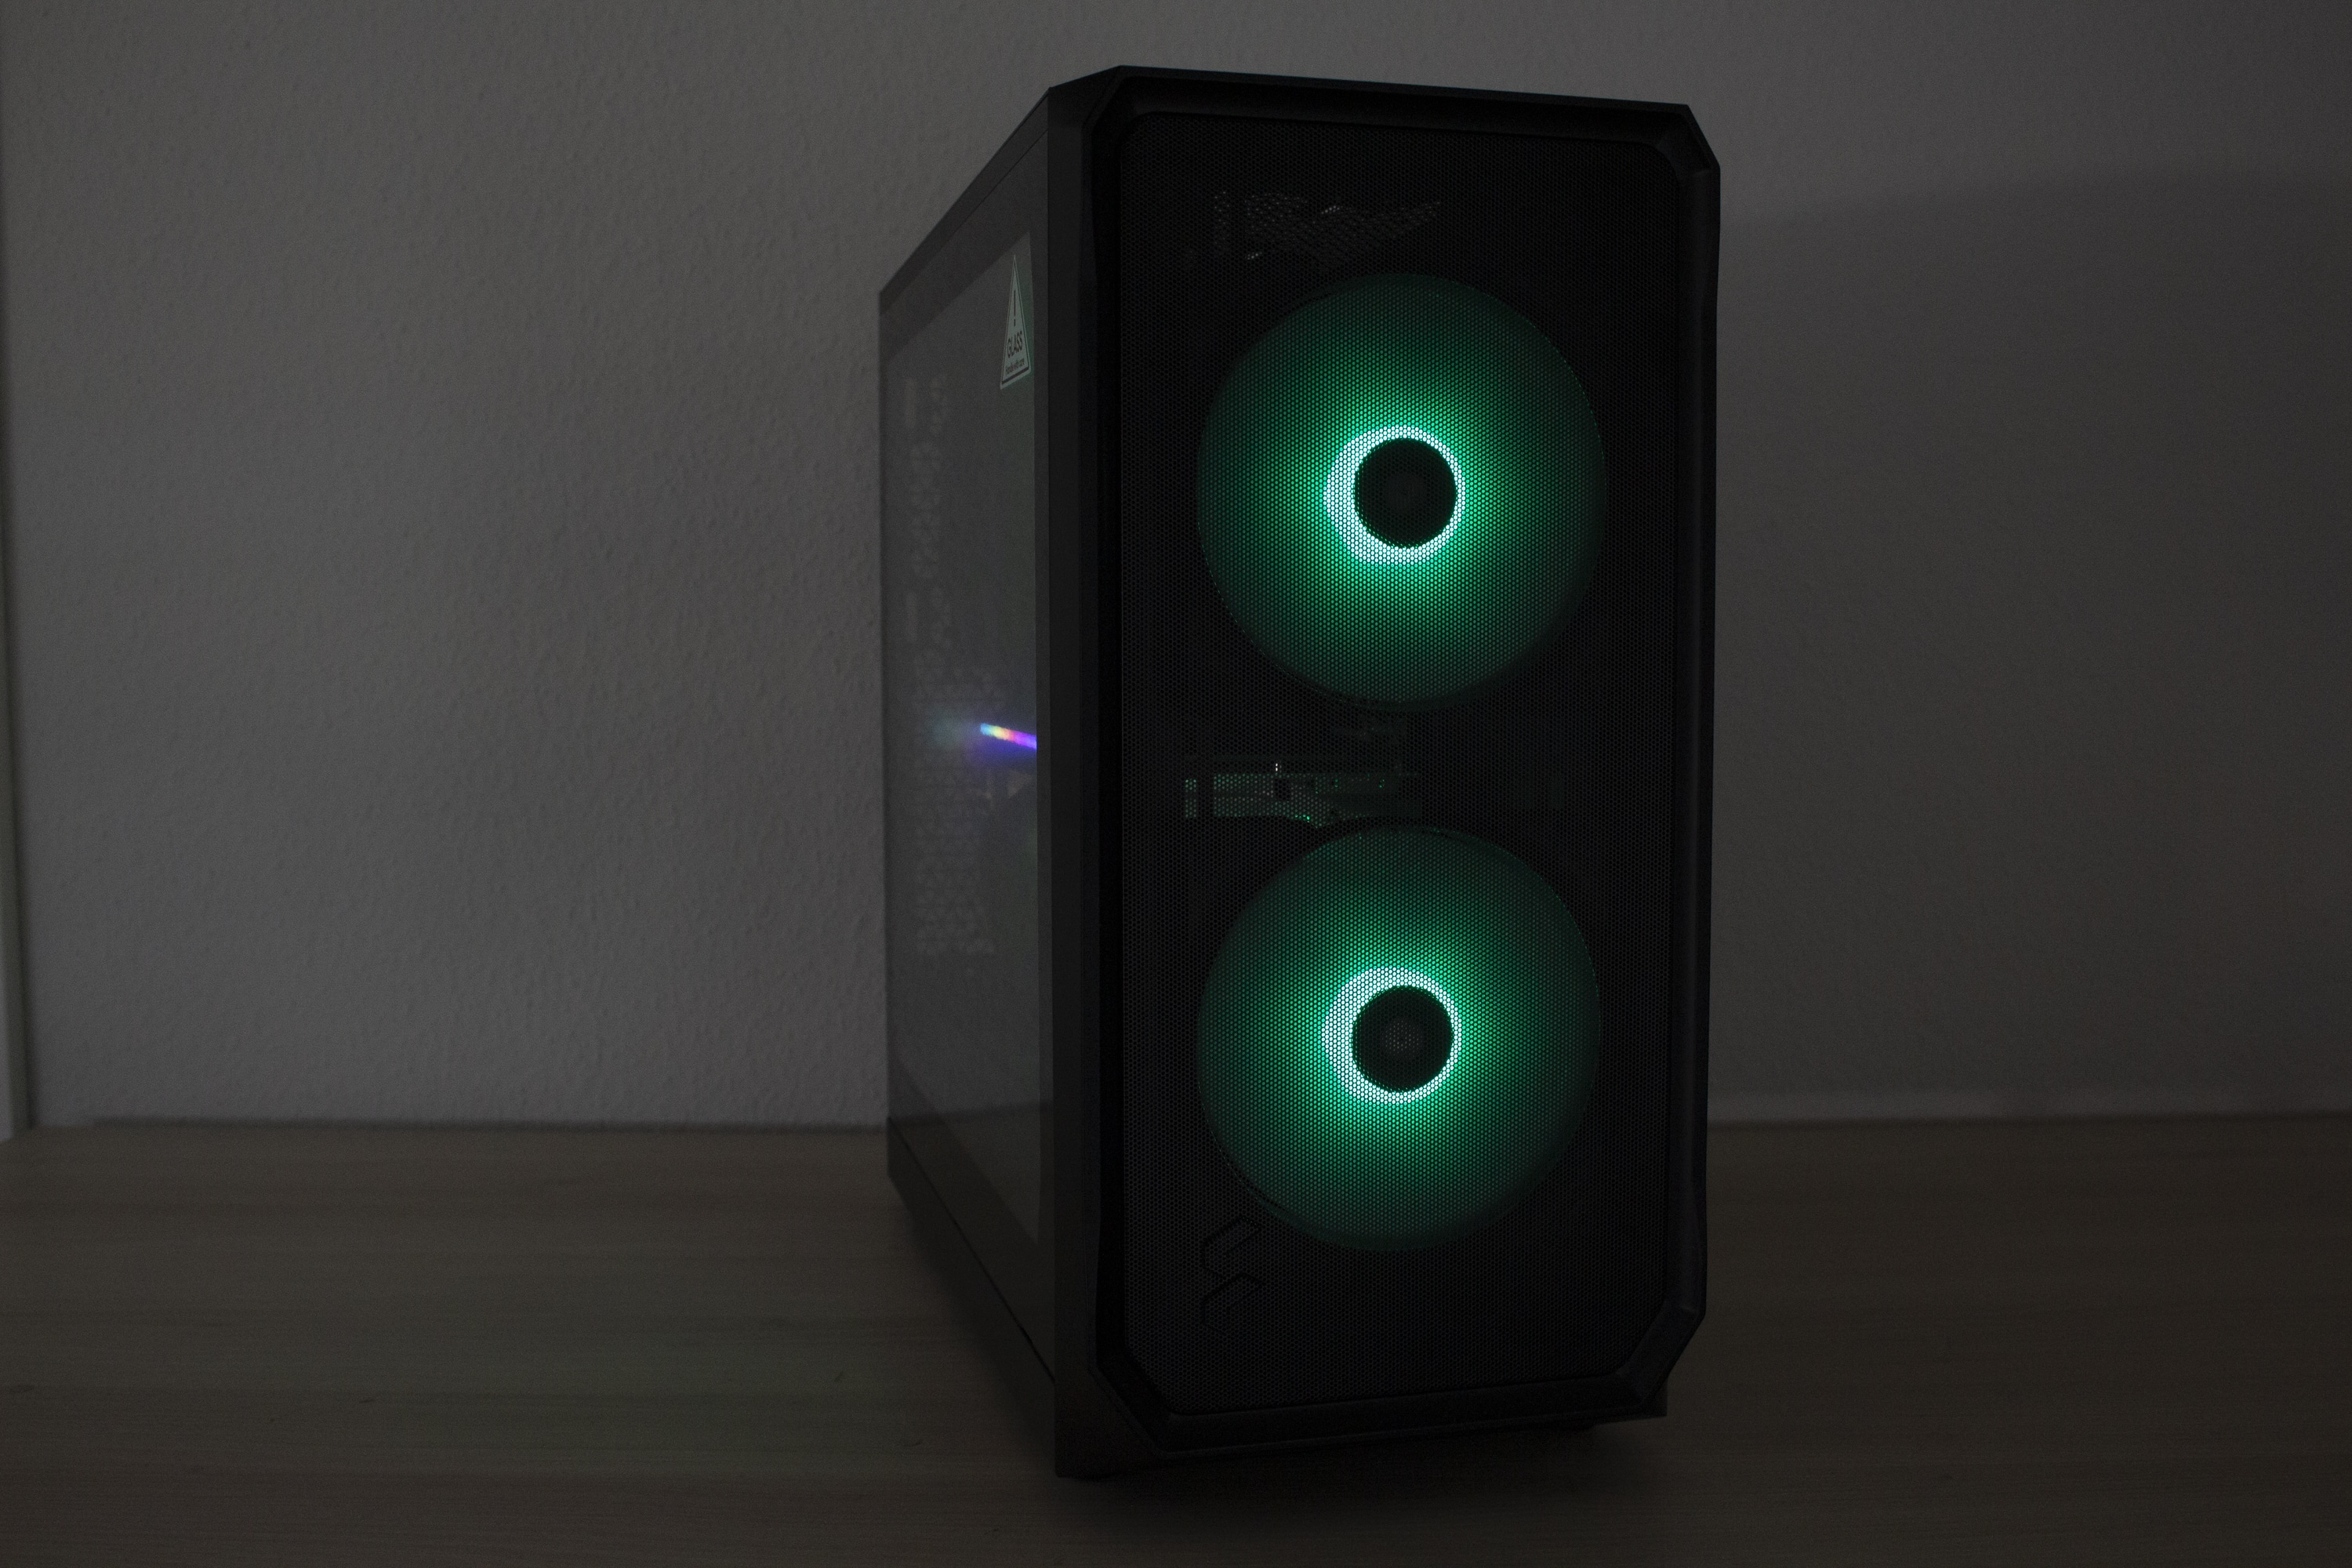 Fractal Design Focus 2 RGB TG review - tower with focus on the